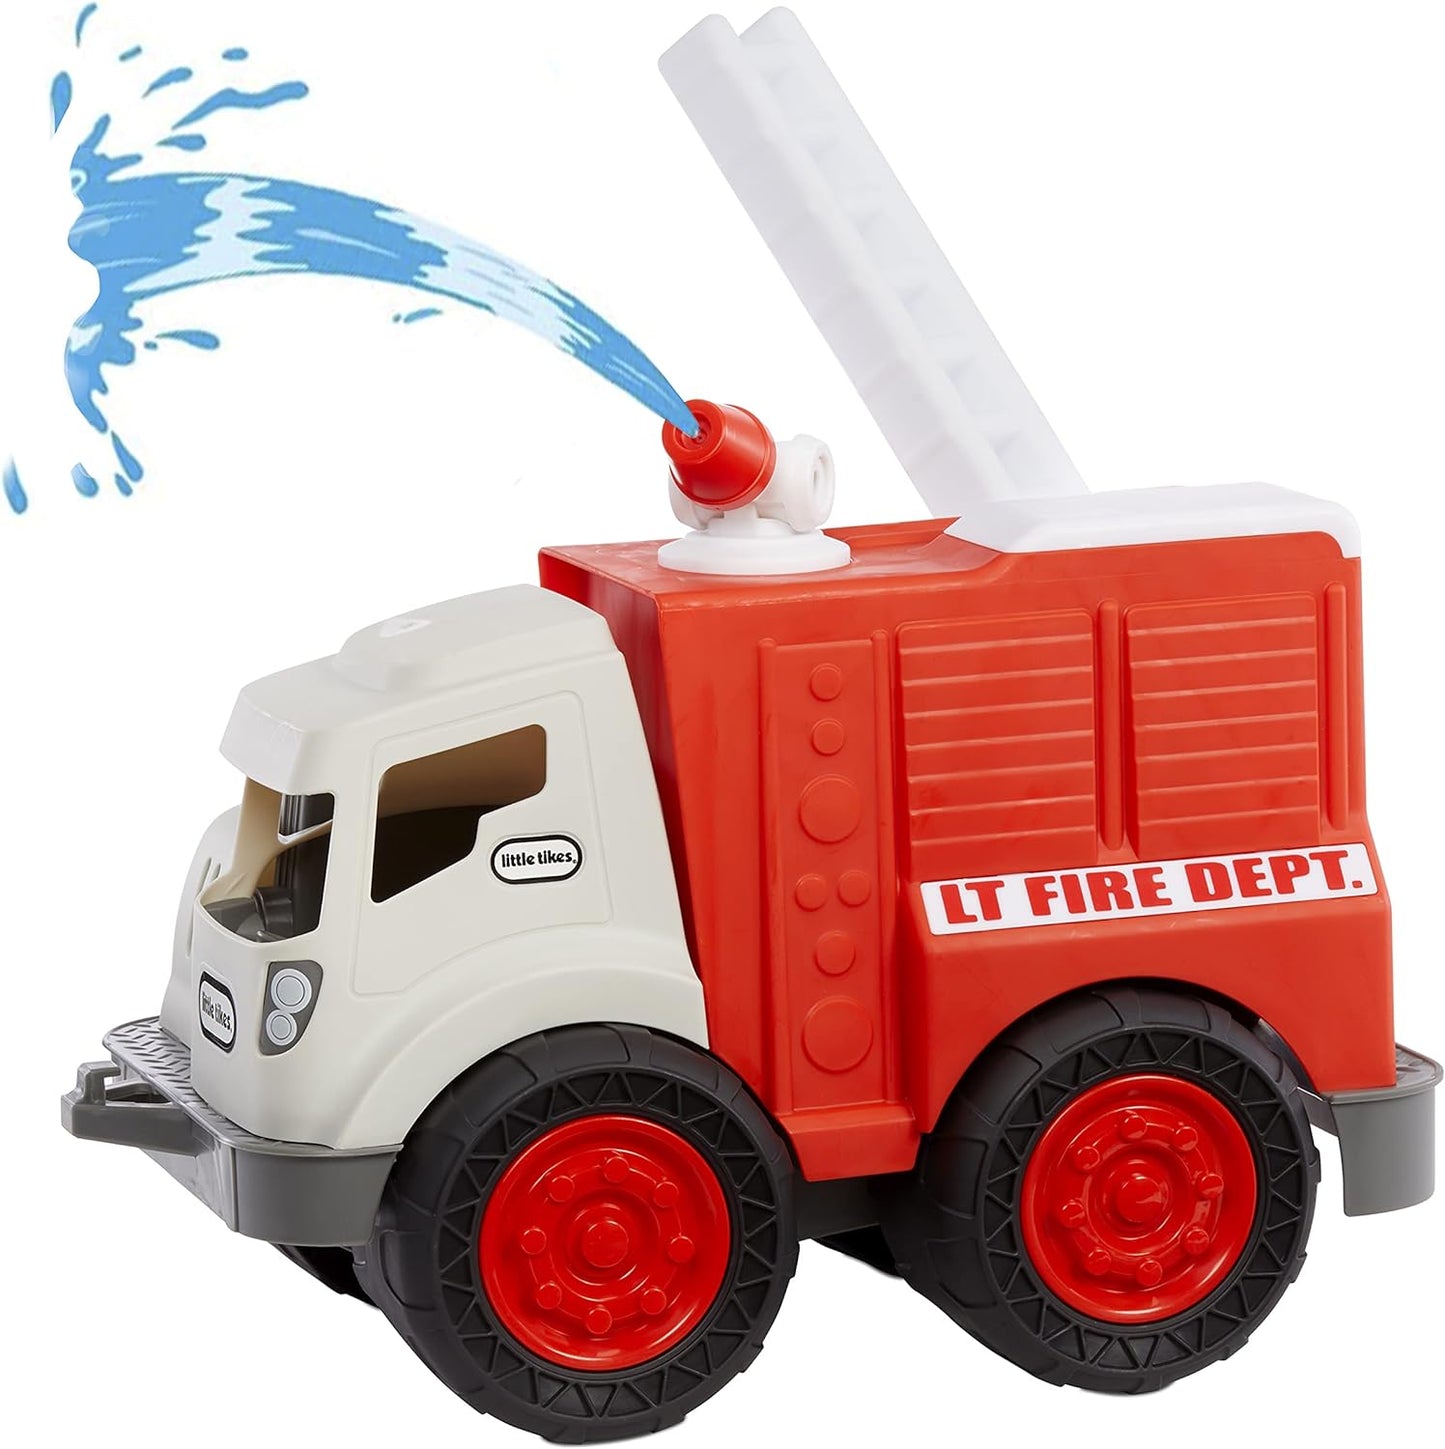 Little Tikes - Dirt Digger Fire Truck for Toddlers